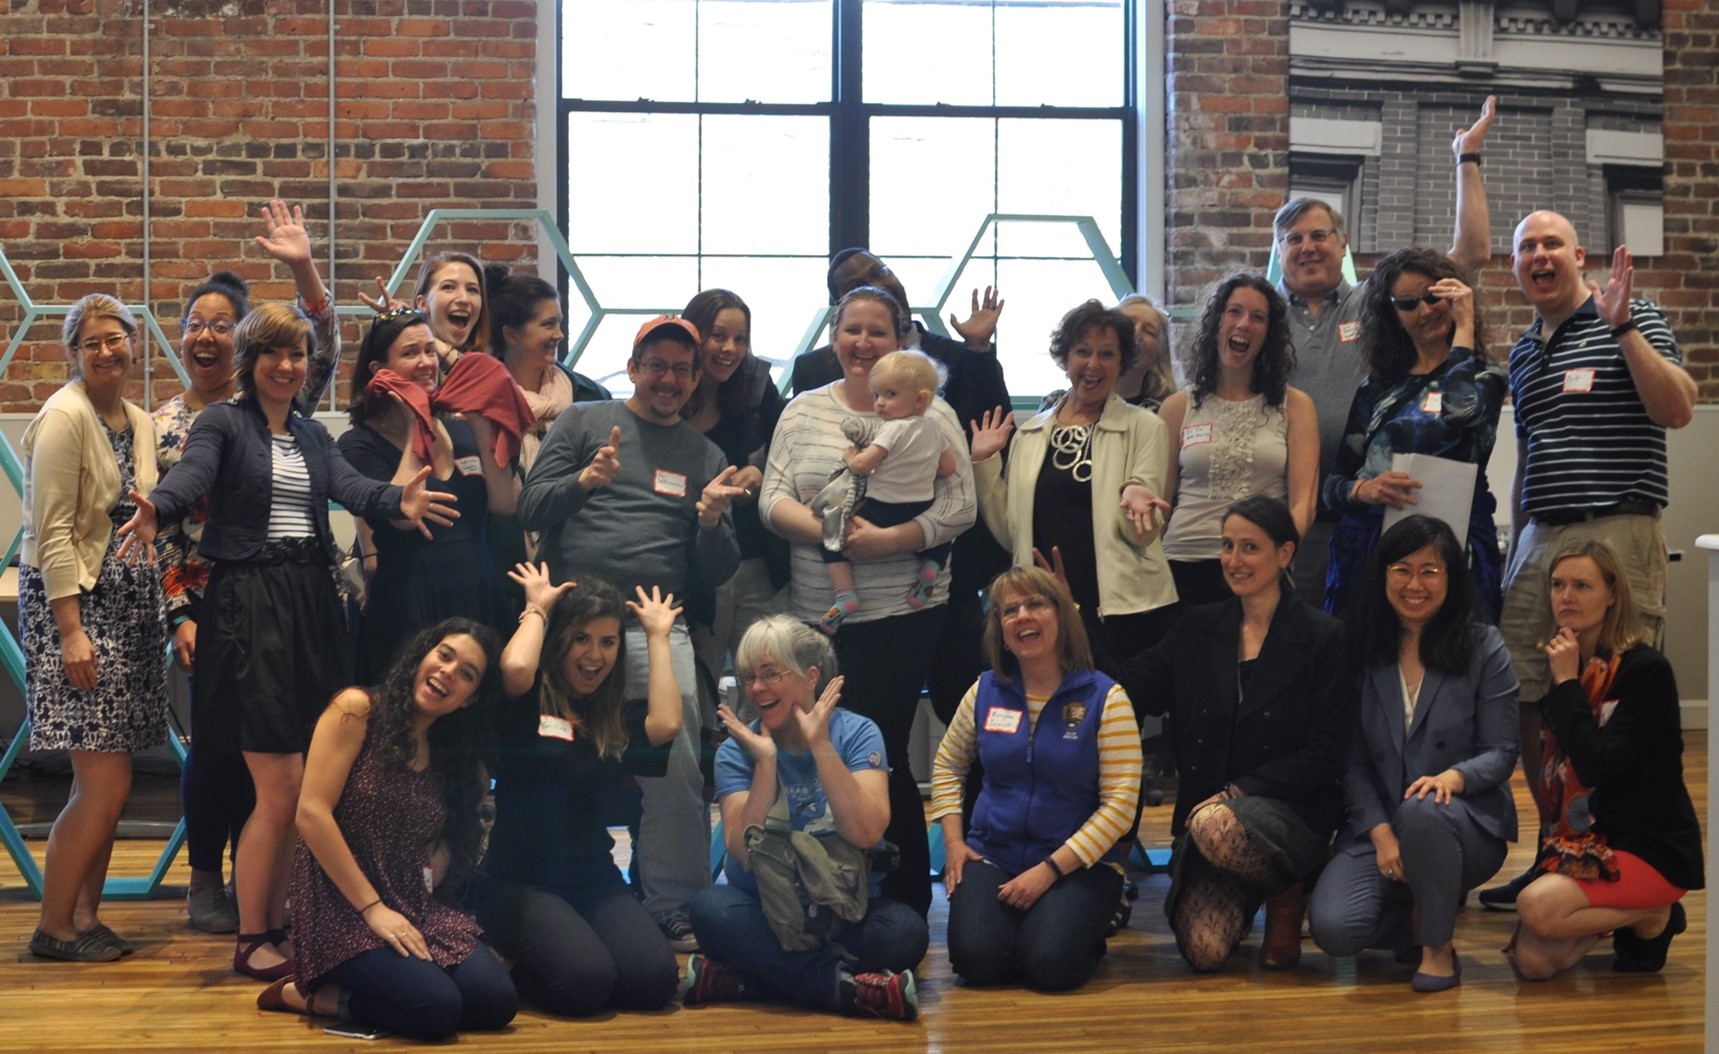 A group of people who attended an MAPC Creative Placemaking workshop smile and wave at the camera.